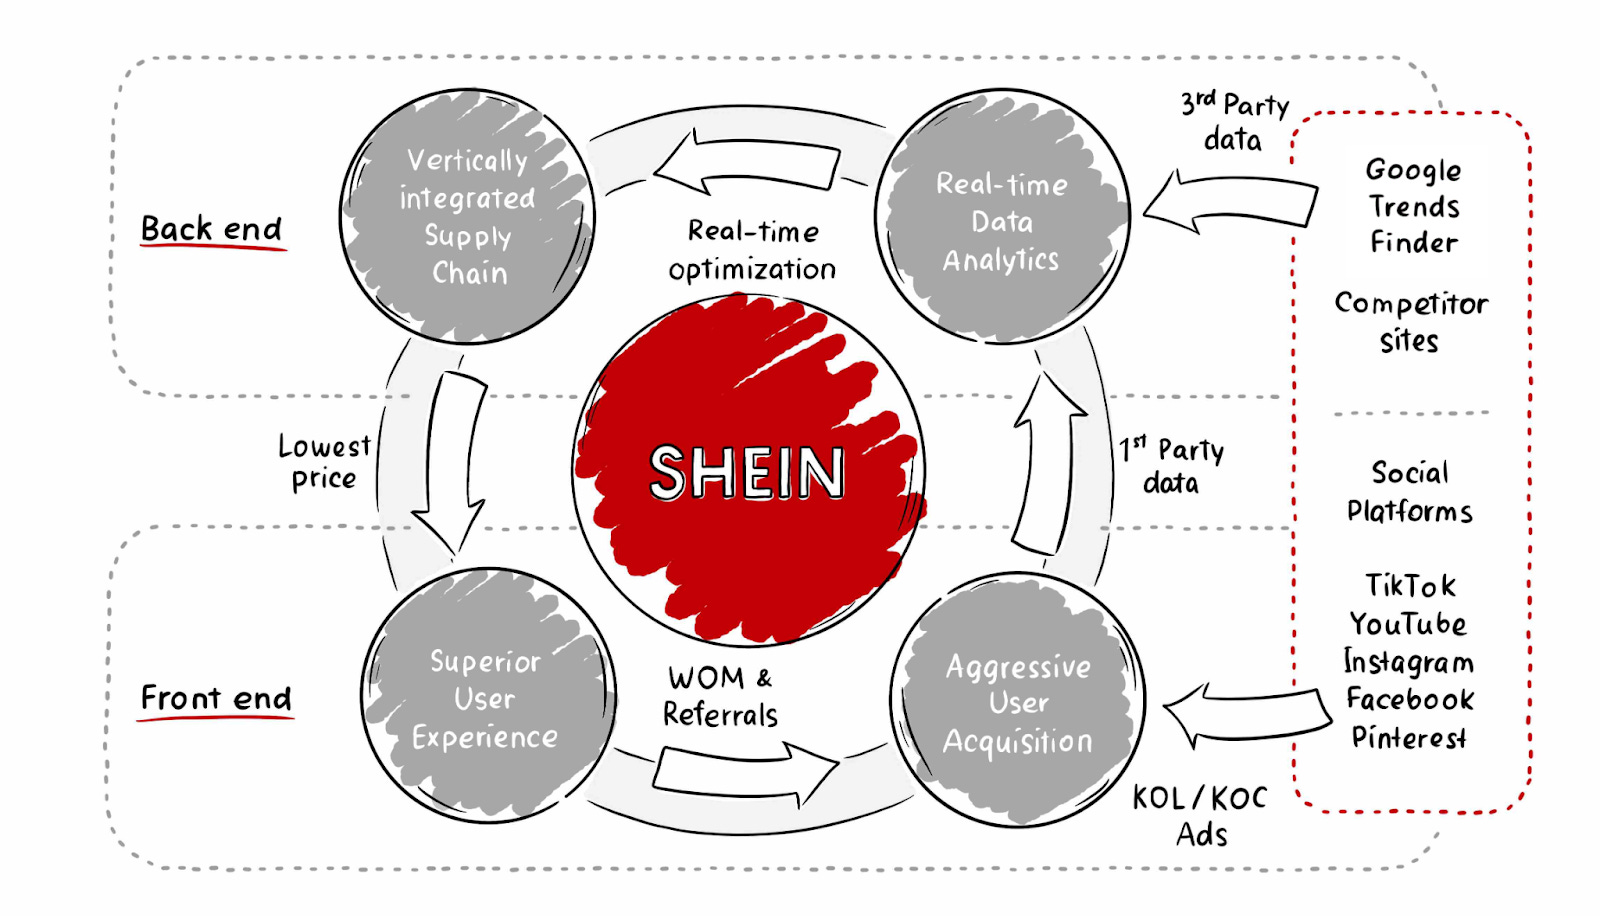 Shein: The TikTok of Ecommerce - Not Boring by Packy McCormick